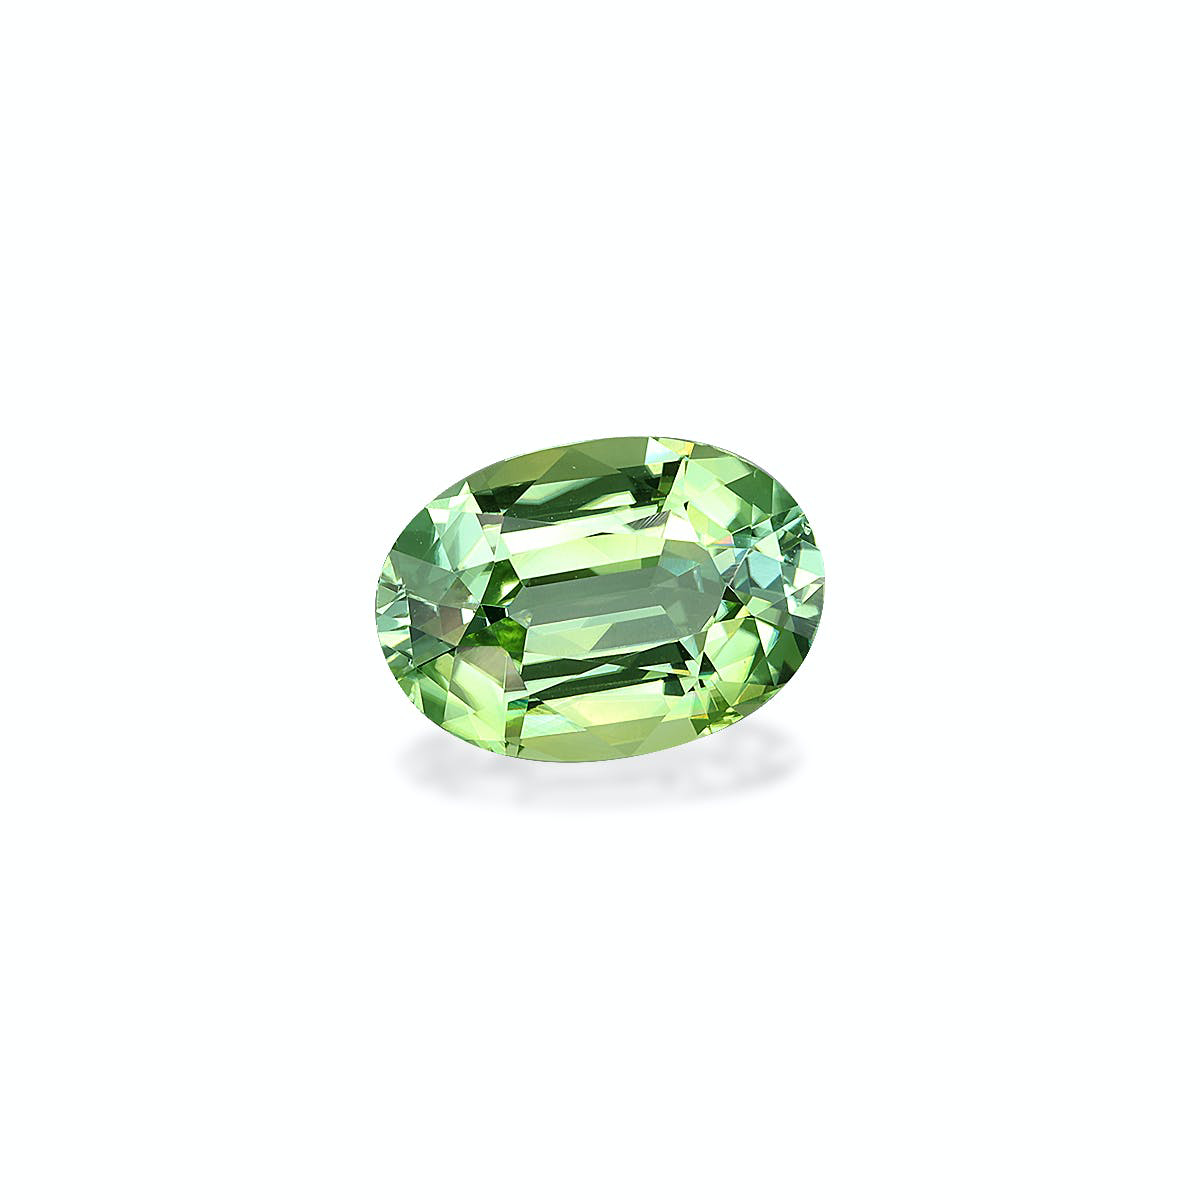 Picture of Pale Green Tourmaline 3.85ct (TG1537)